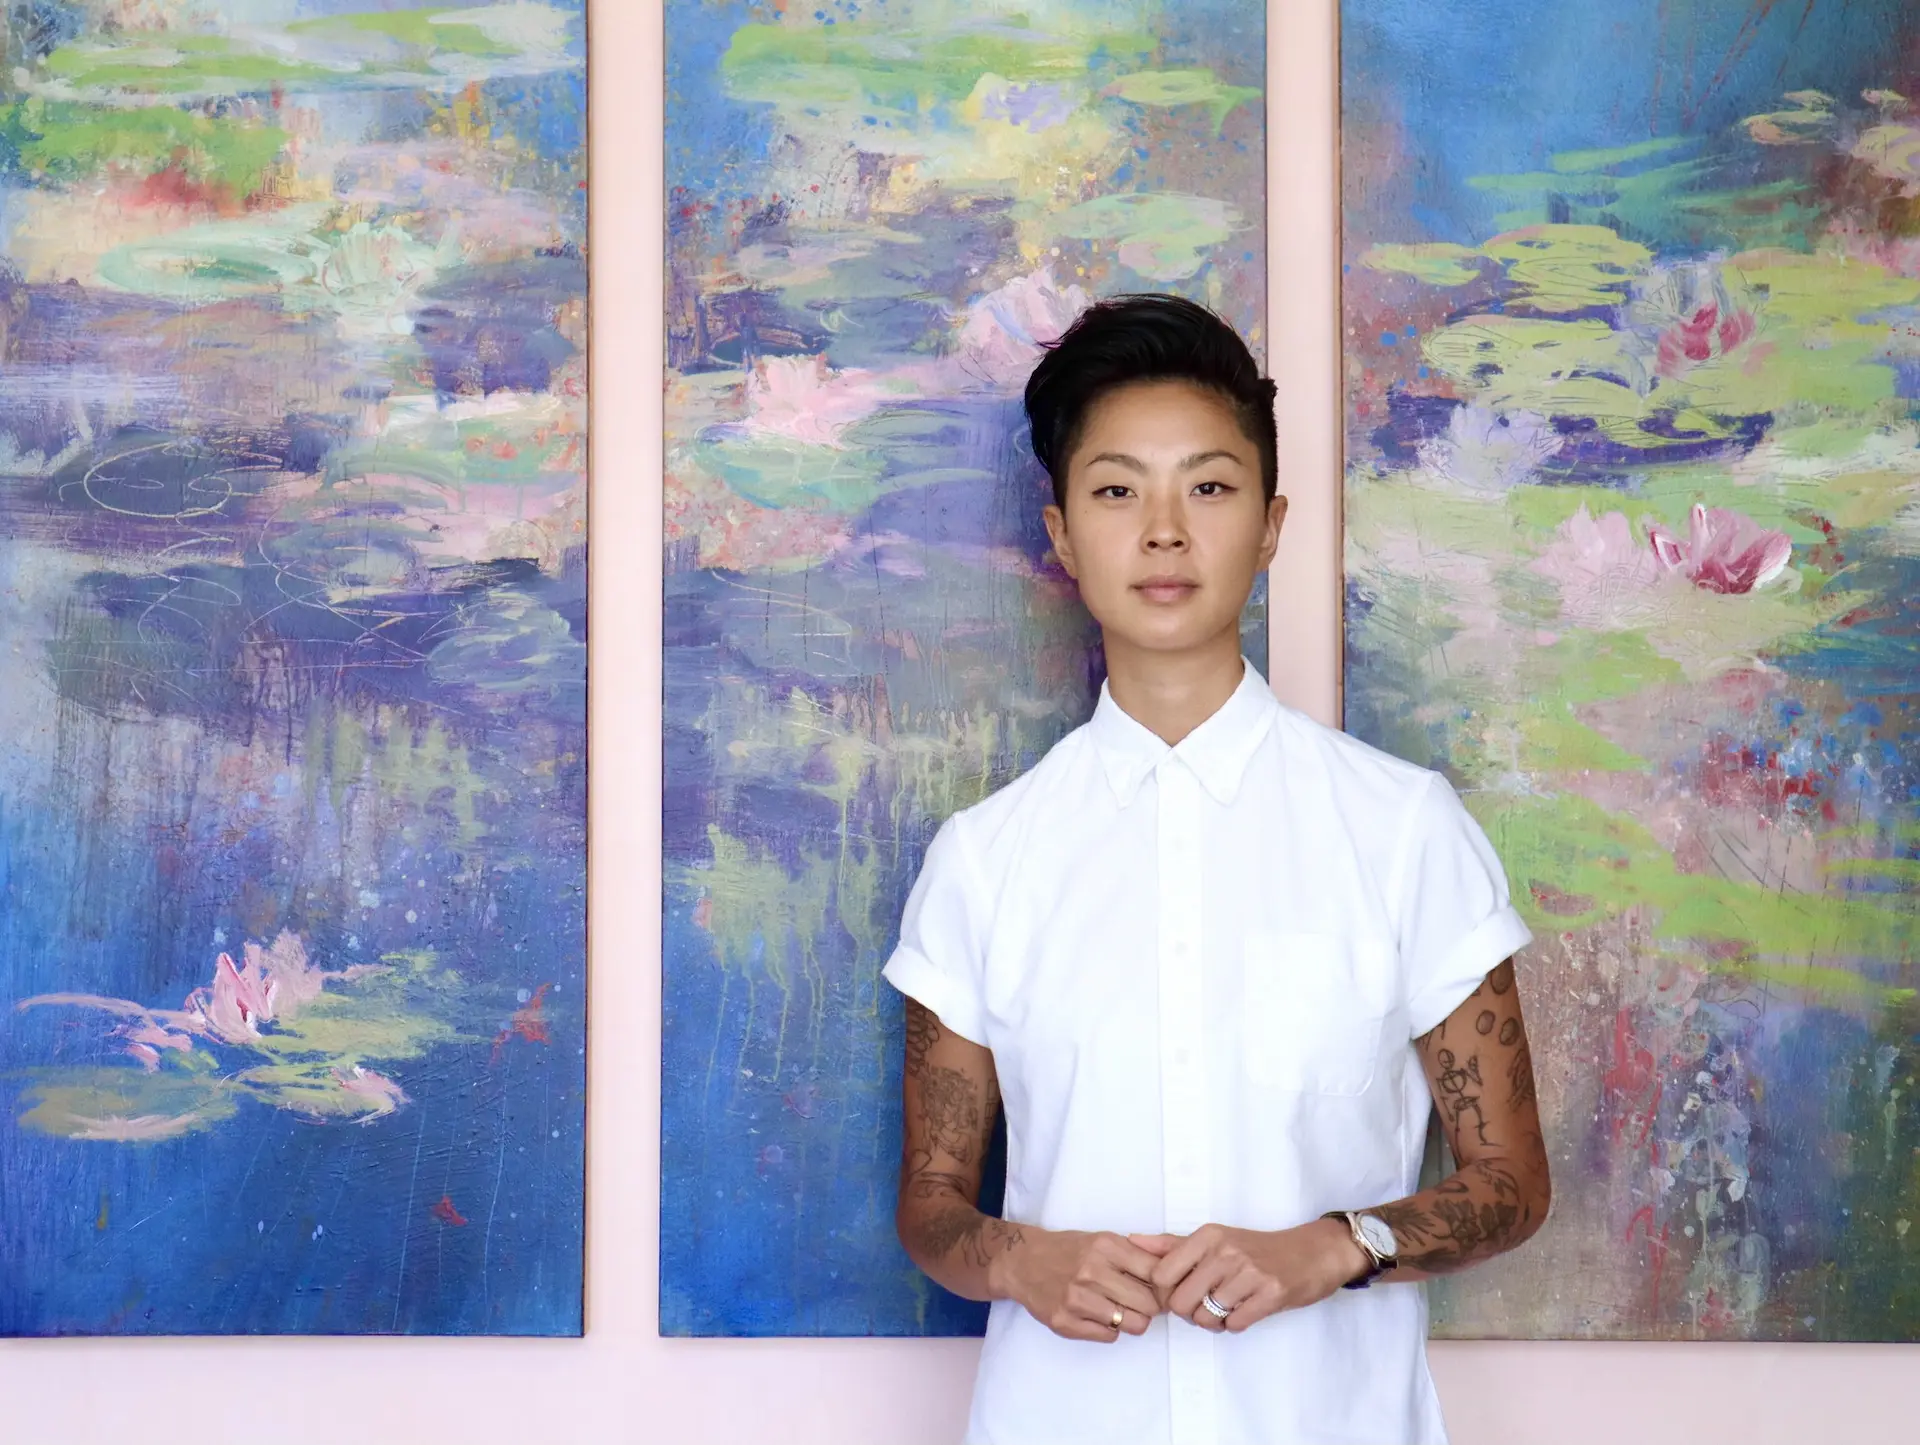 A person wearing a white collared shirt is standing in front of a painted tapestry and a pink wall.